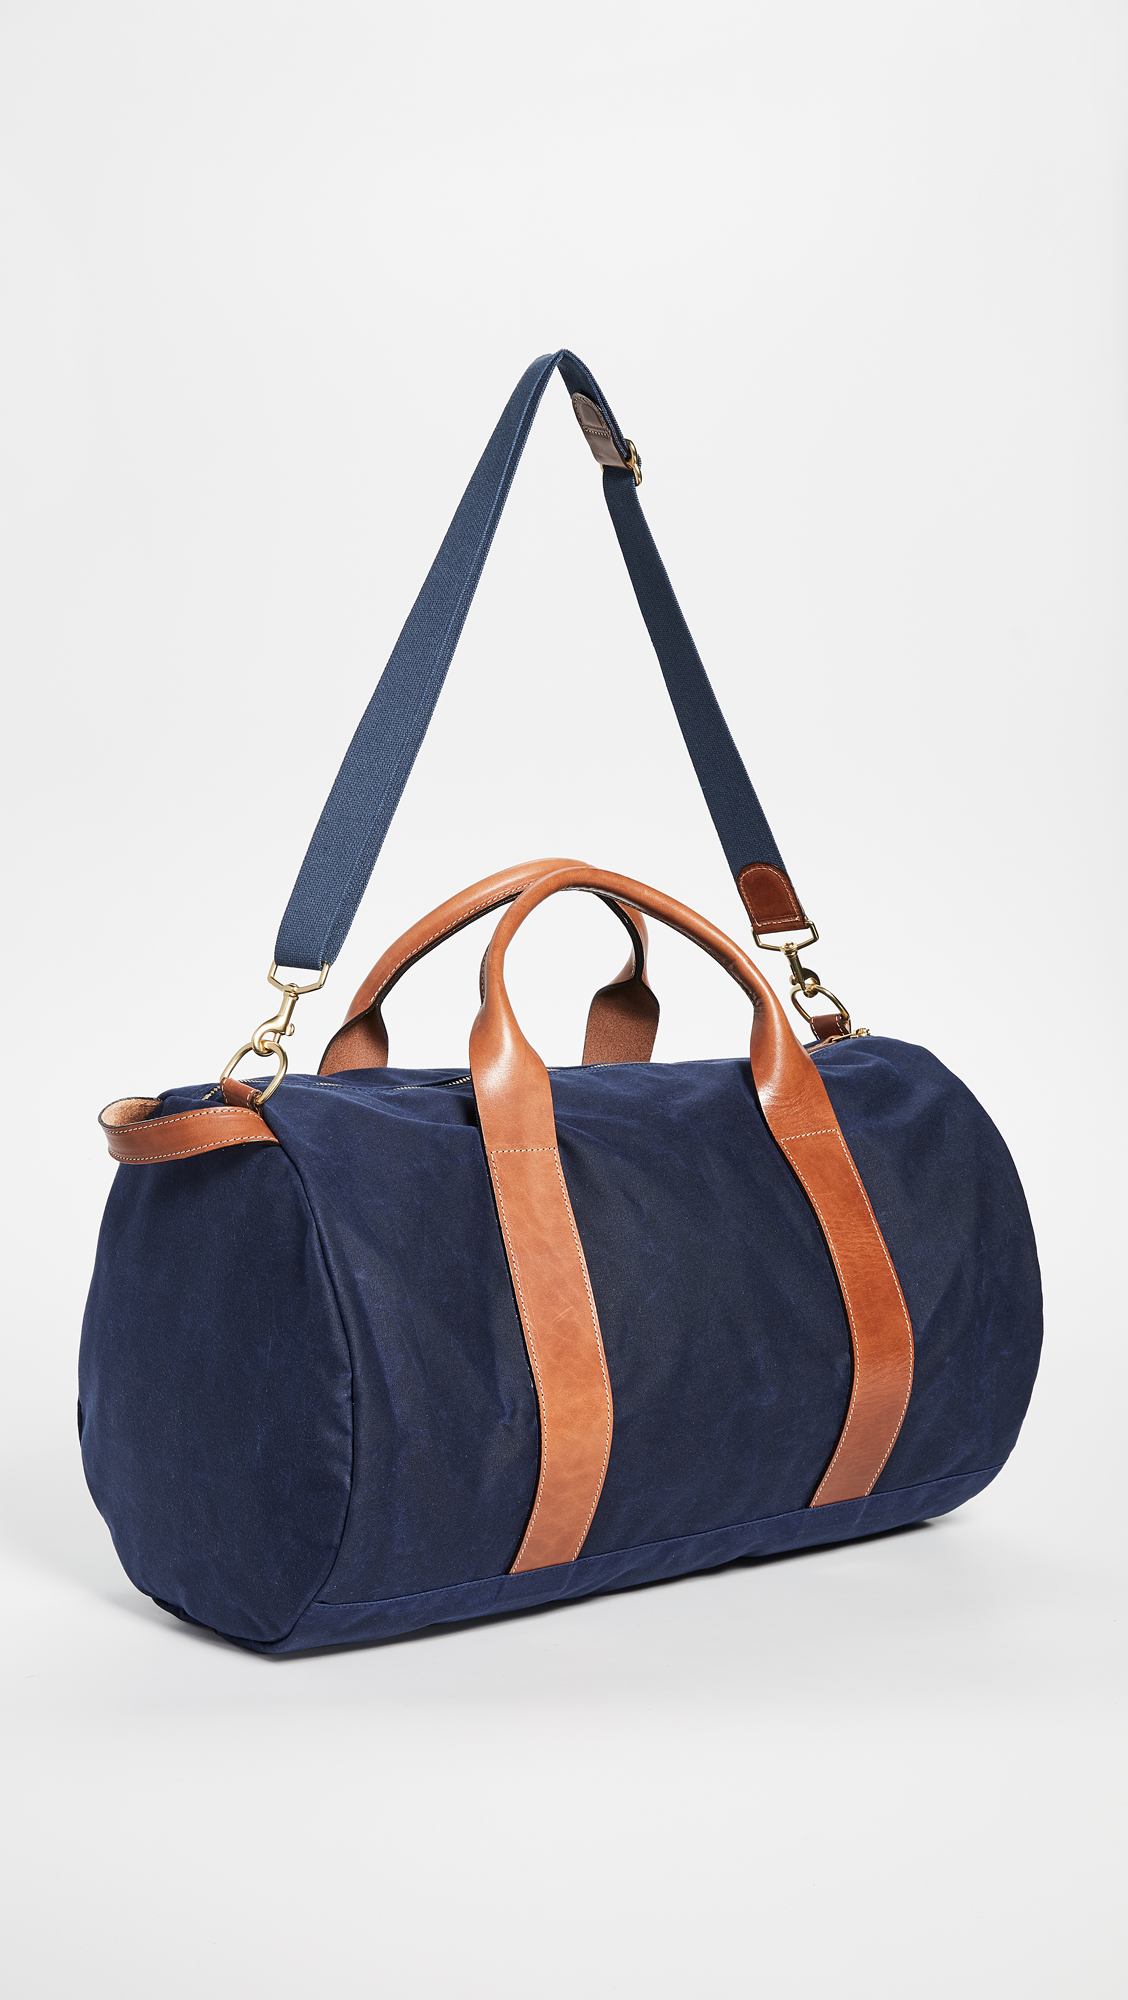 Navy Blue With Brown Be Leather Handles